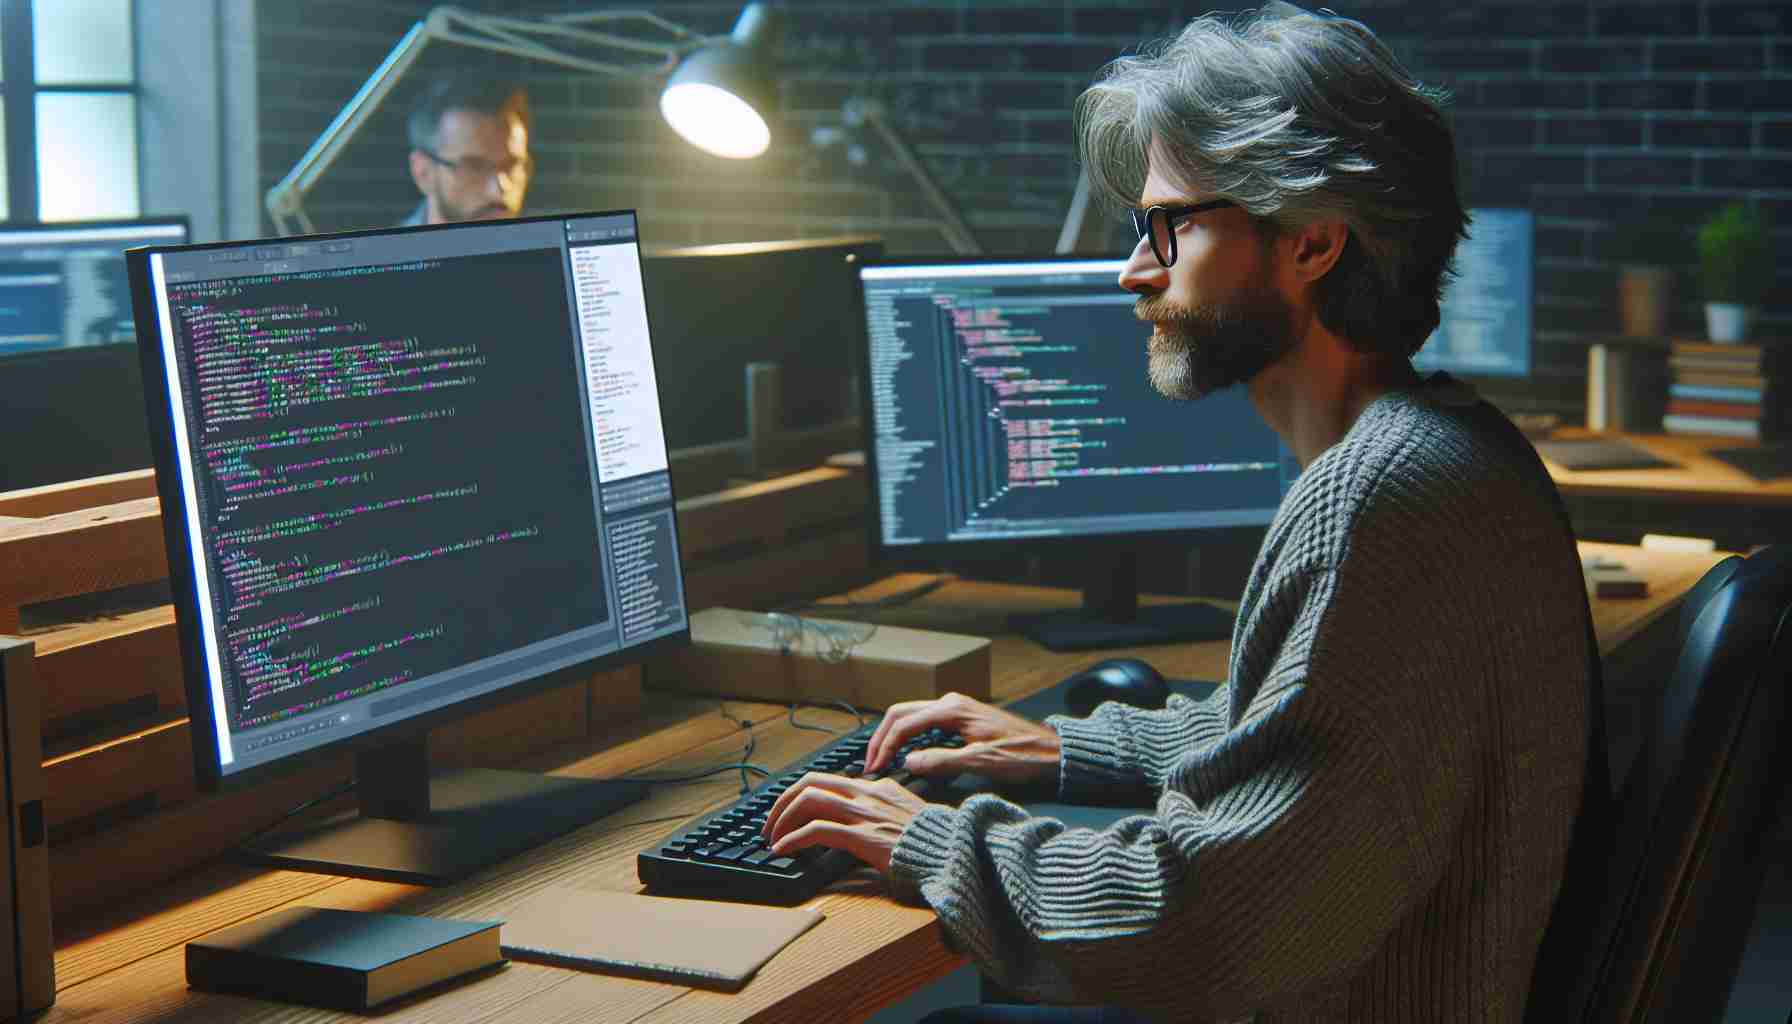 Realistic HD photo of a coding tutorial titled 'Unraveling the Secrets of Gaming' conducted by a Caucasian male with grey hair and glasses, wearing a casual sweater. The scene captures him in front of a computer setup, immersed in demonstrating game development techniques.